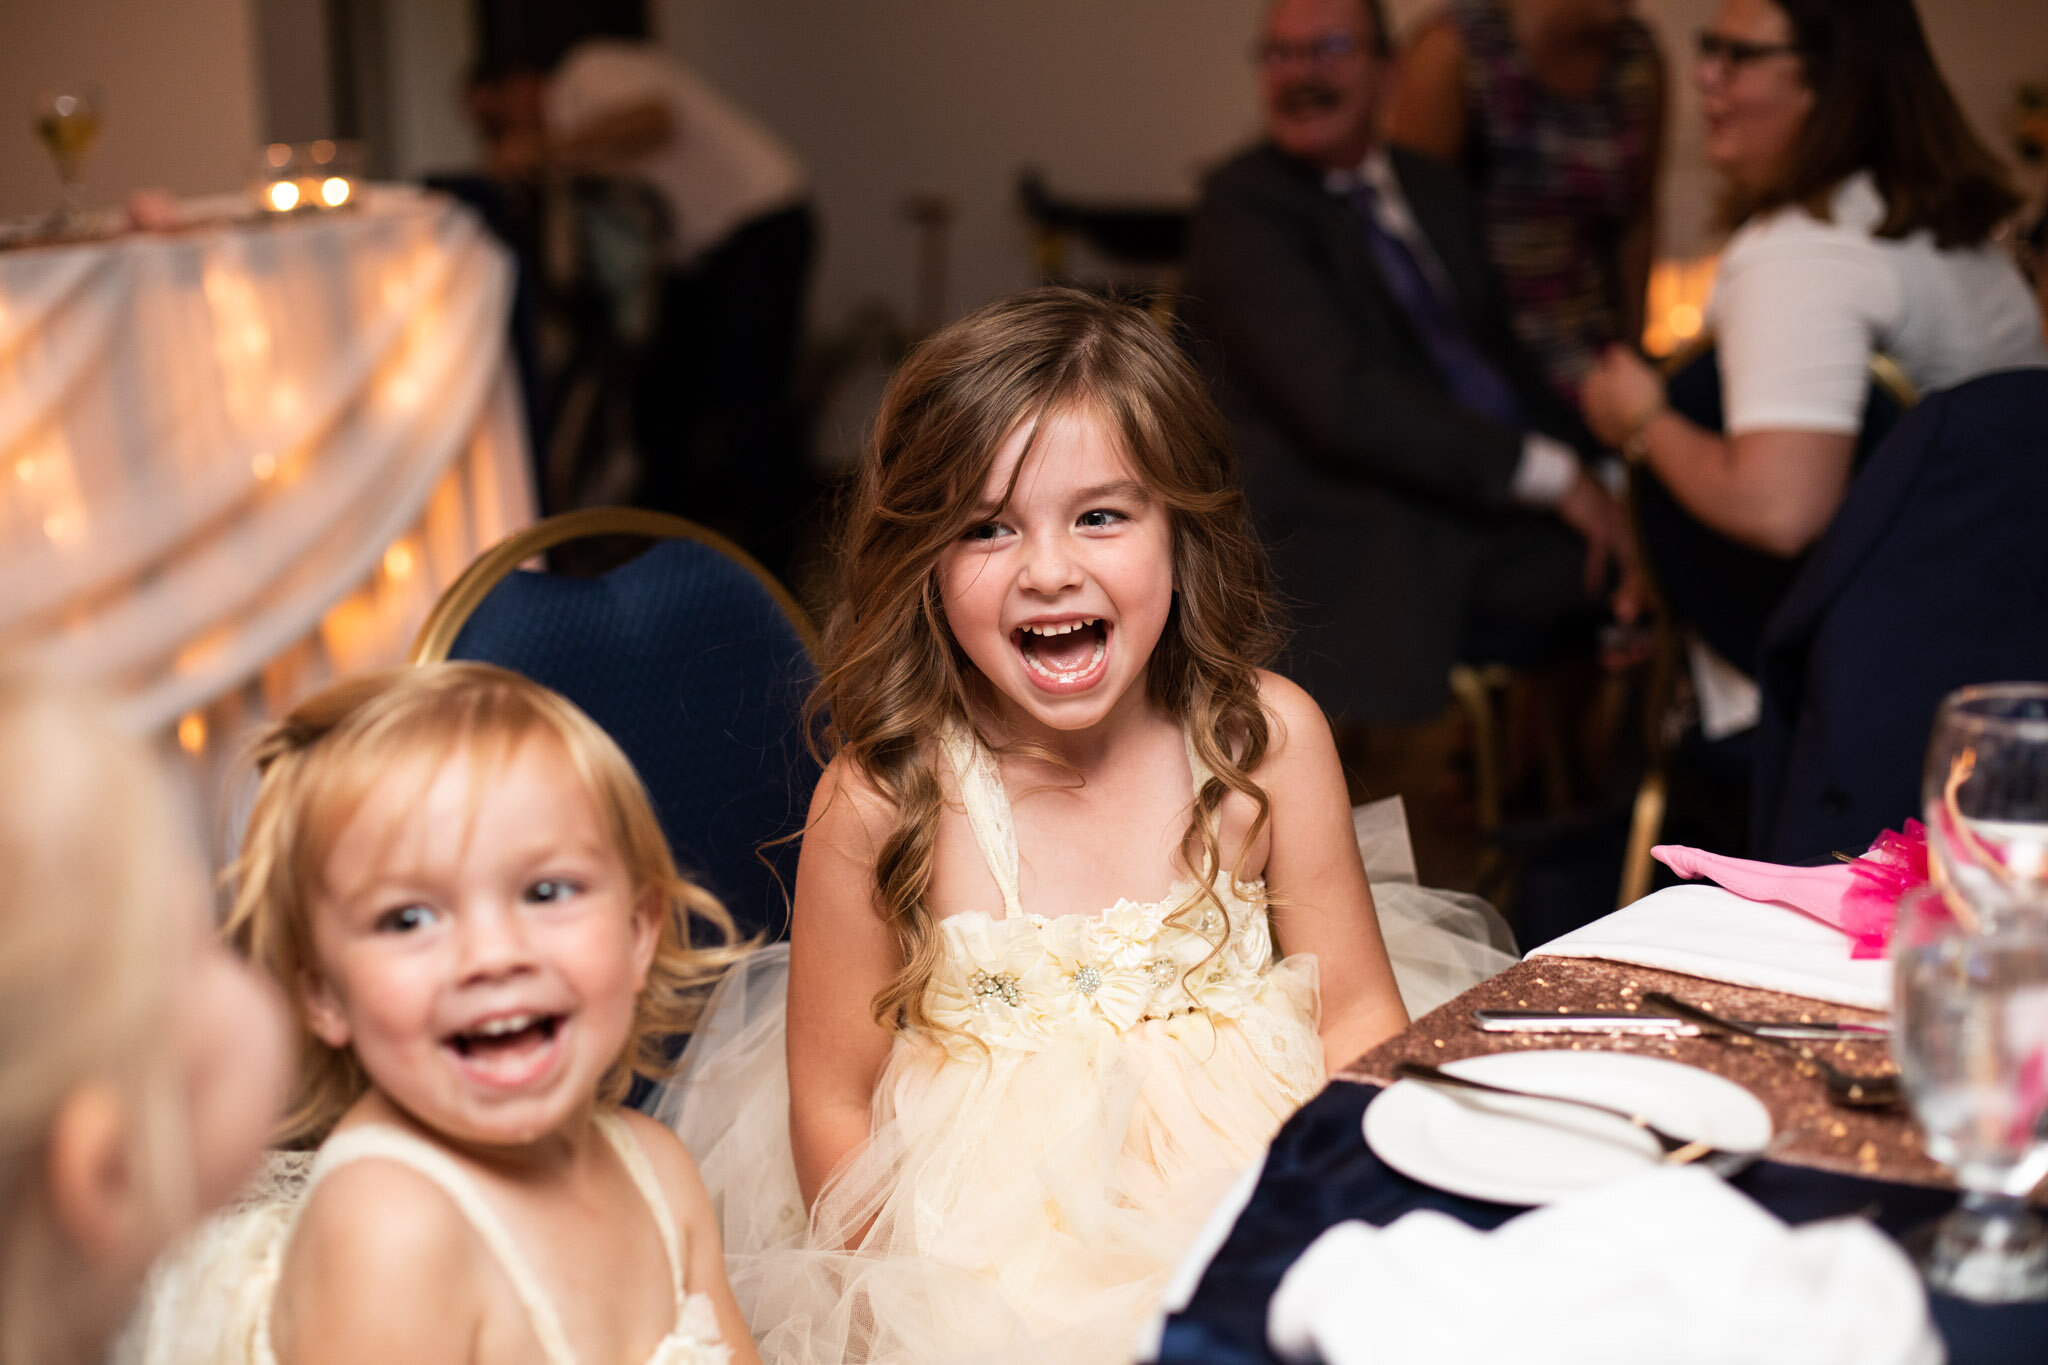 flower girls excited at wedding table during reception.jpg